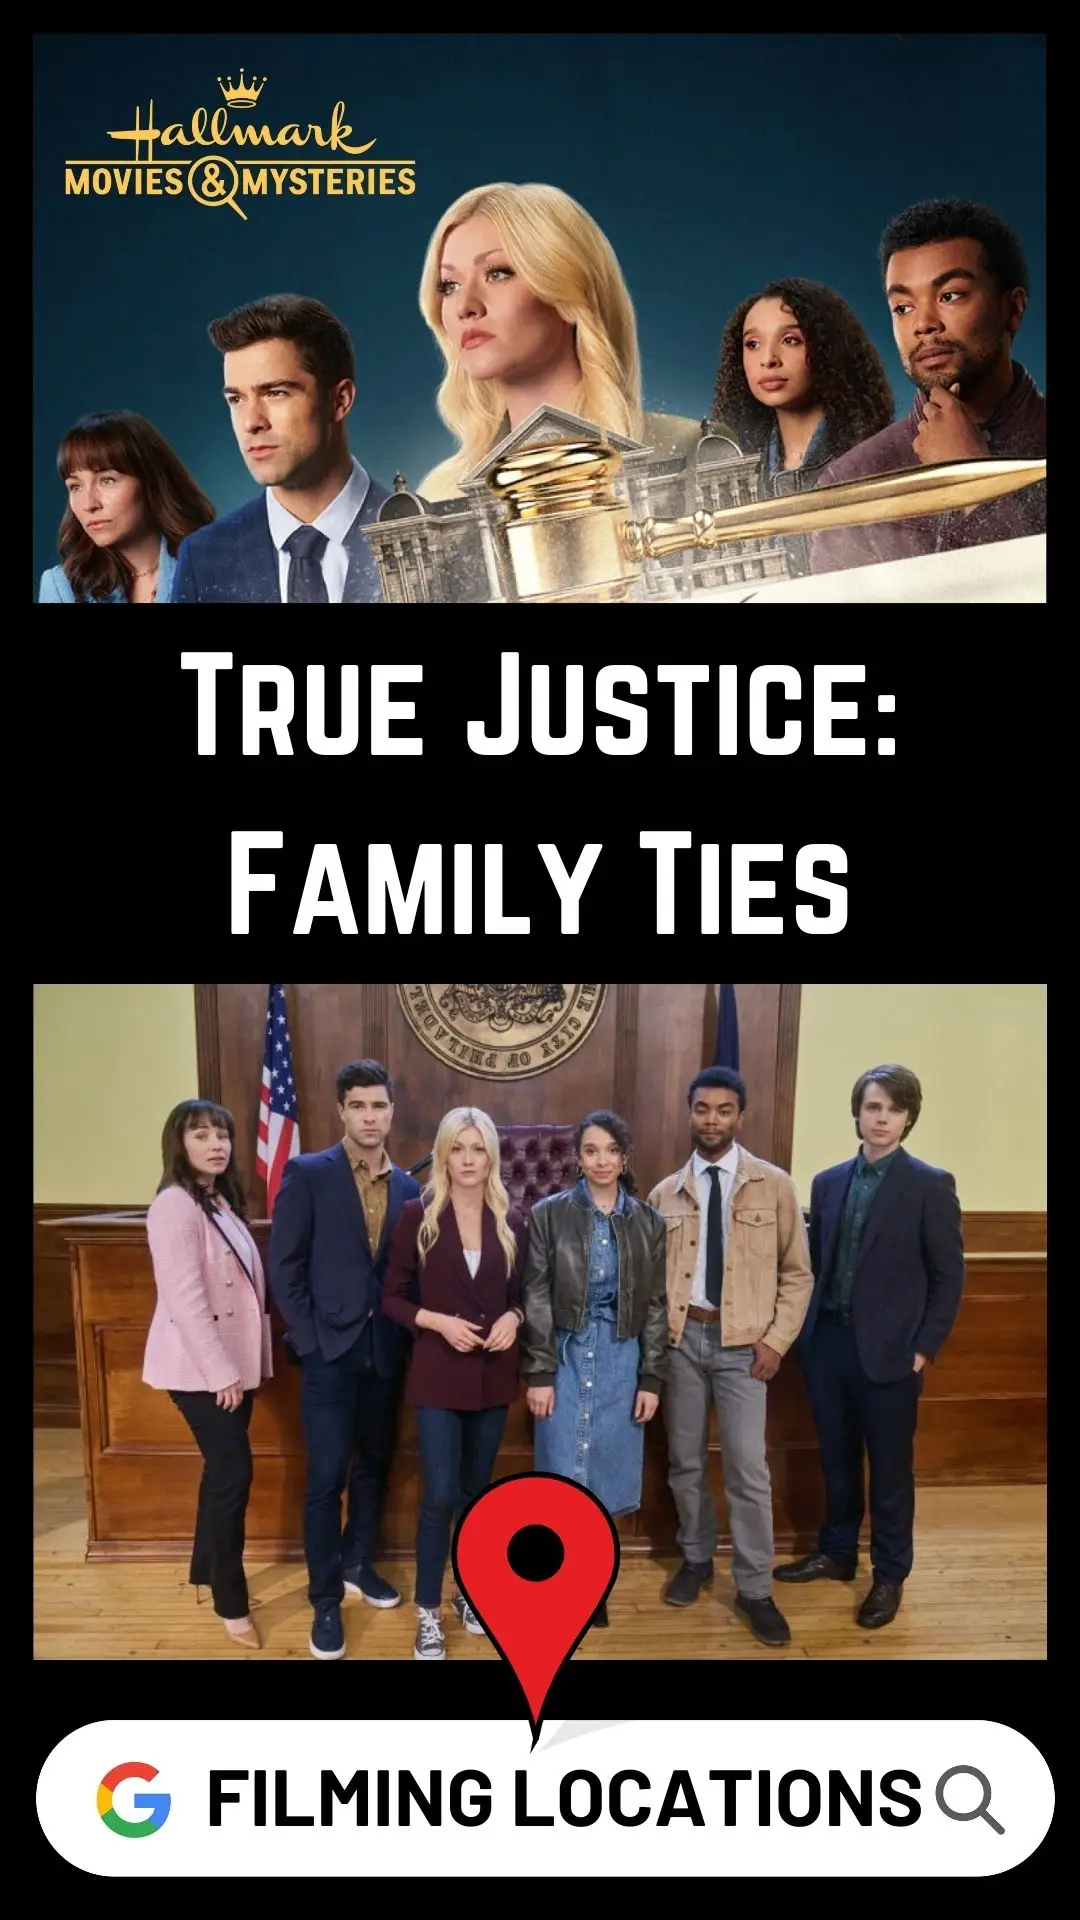 True Justice Family Ties Filming Locations